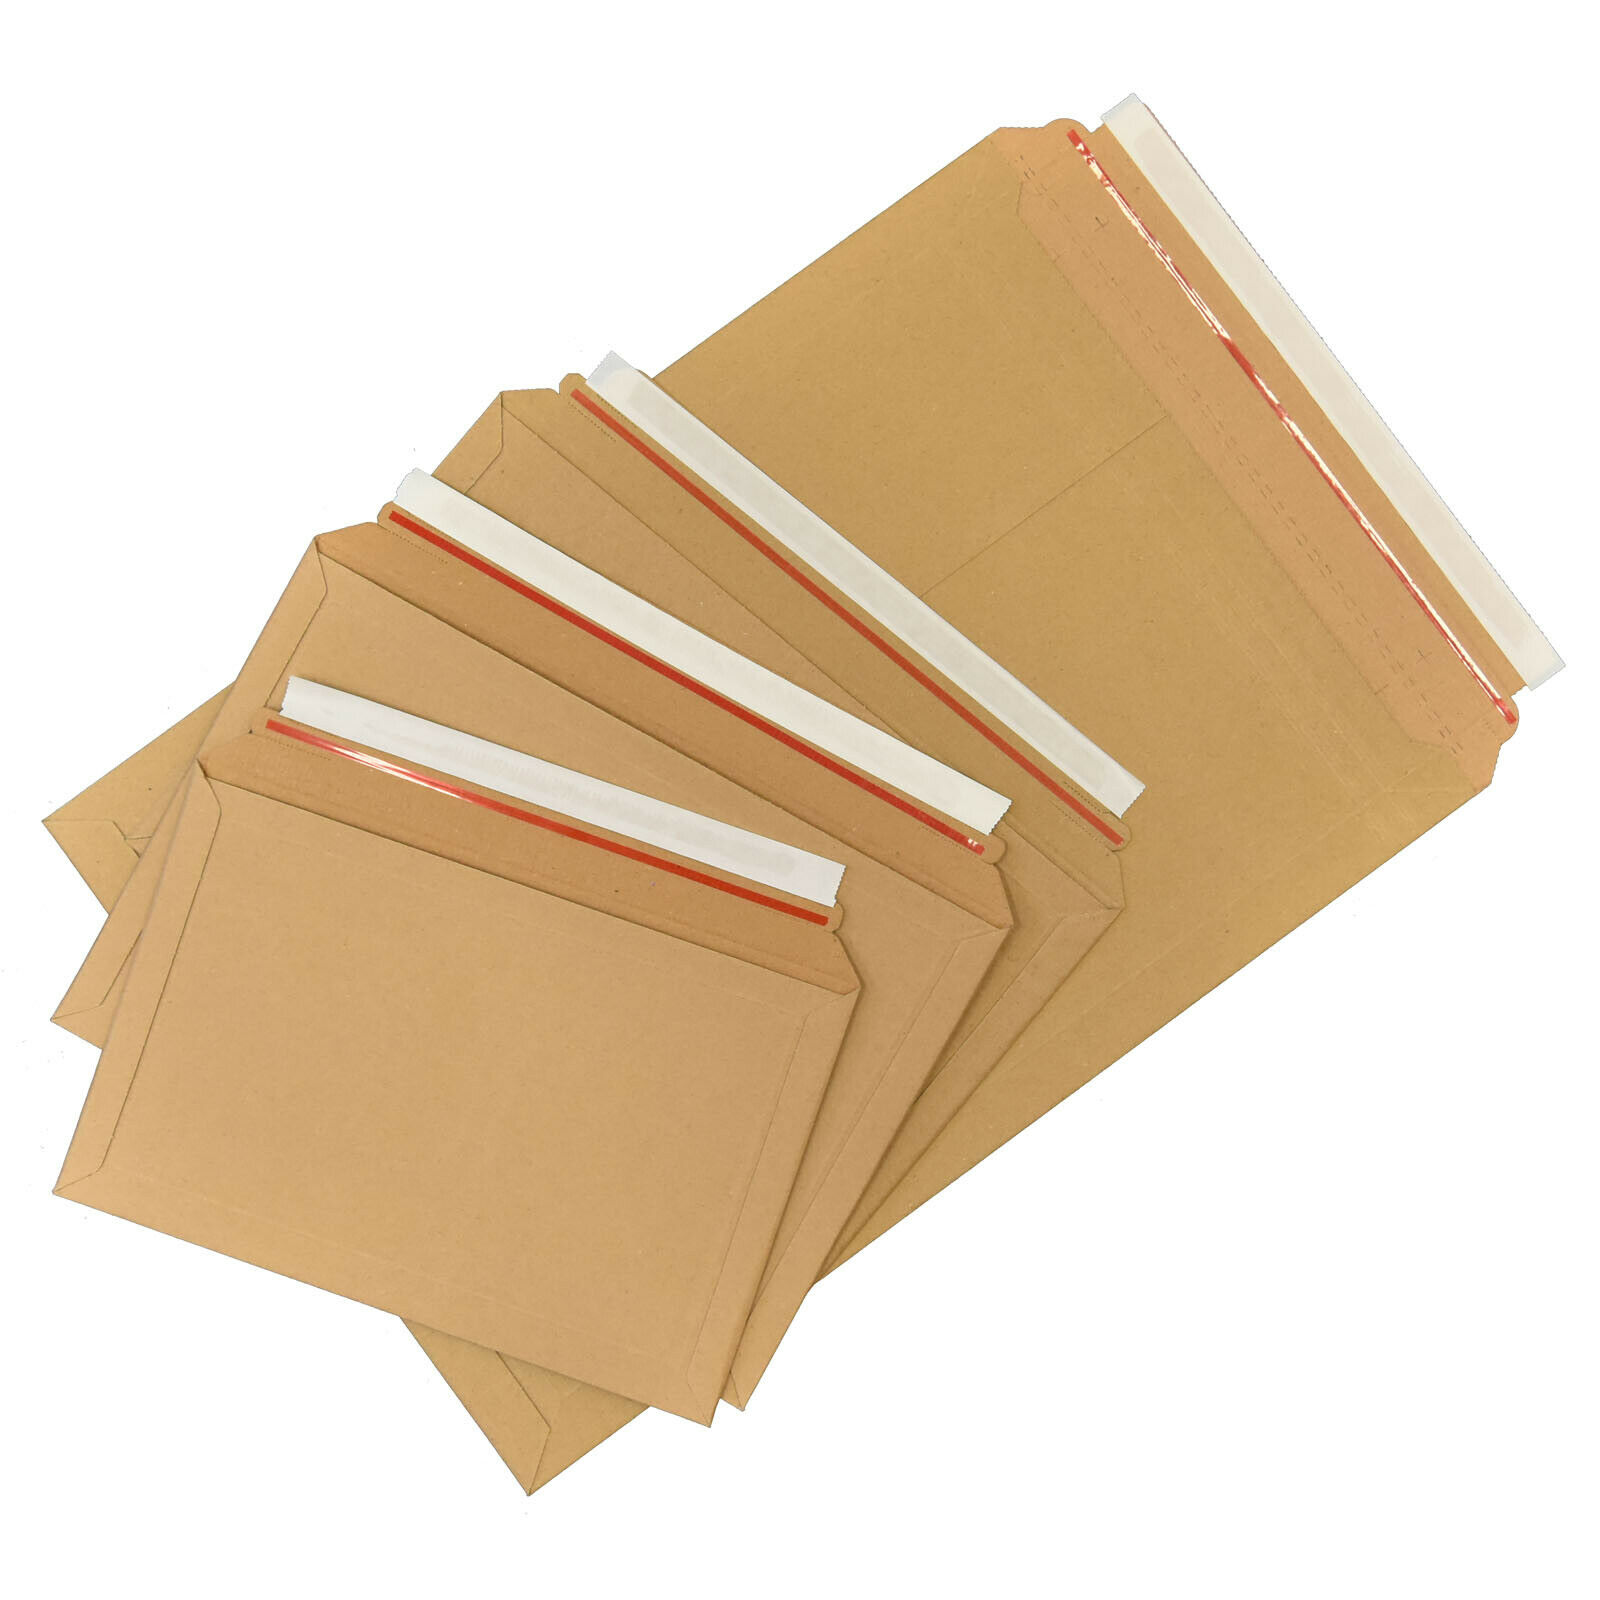 A3 A4 A5 Large Letter Square Cardboard Book Envelopes Strong Rigid Expanding